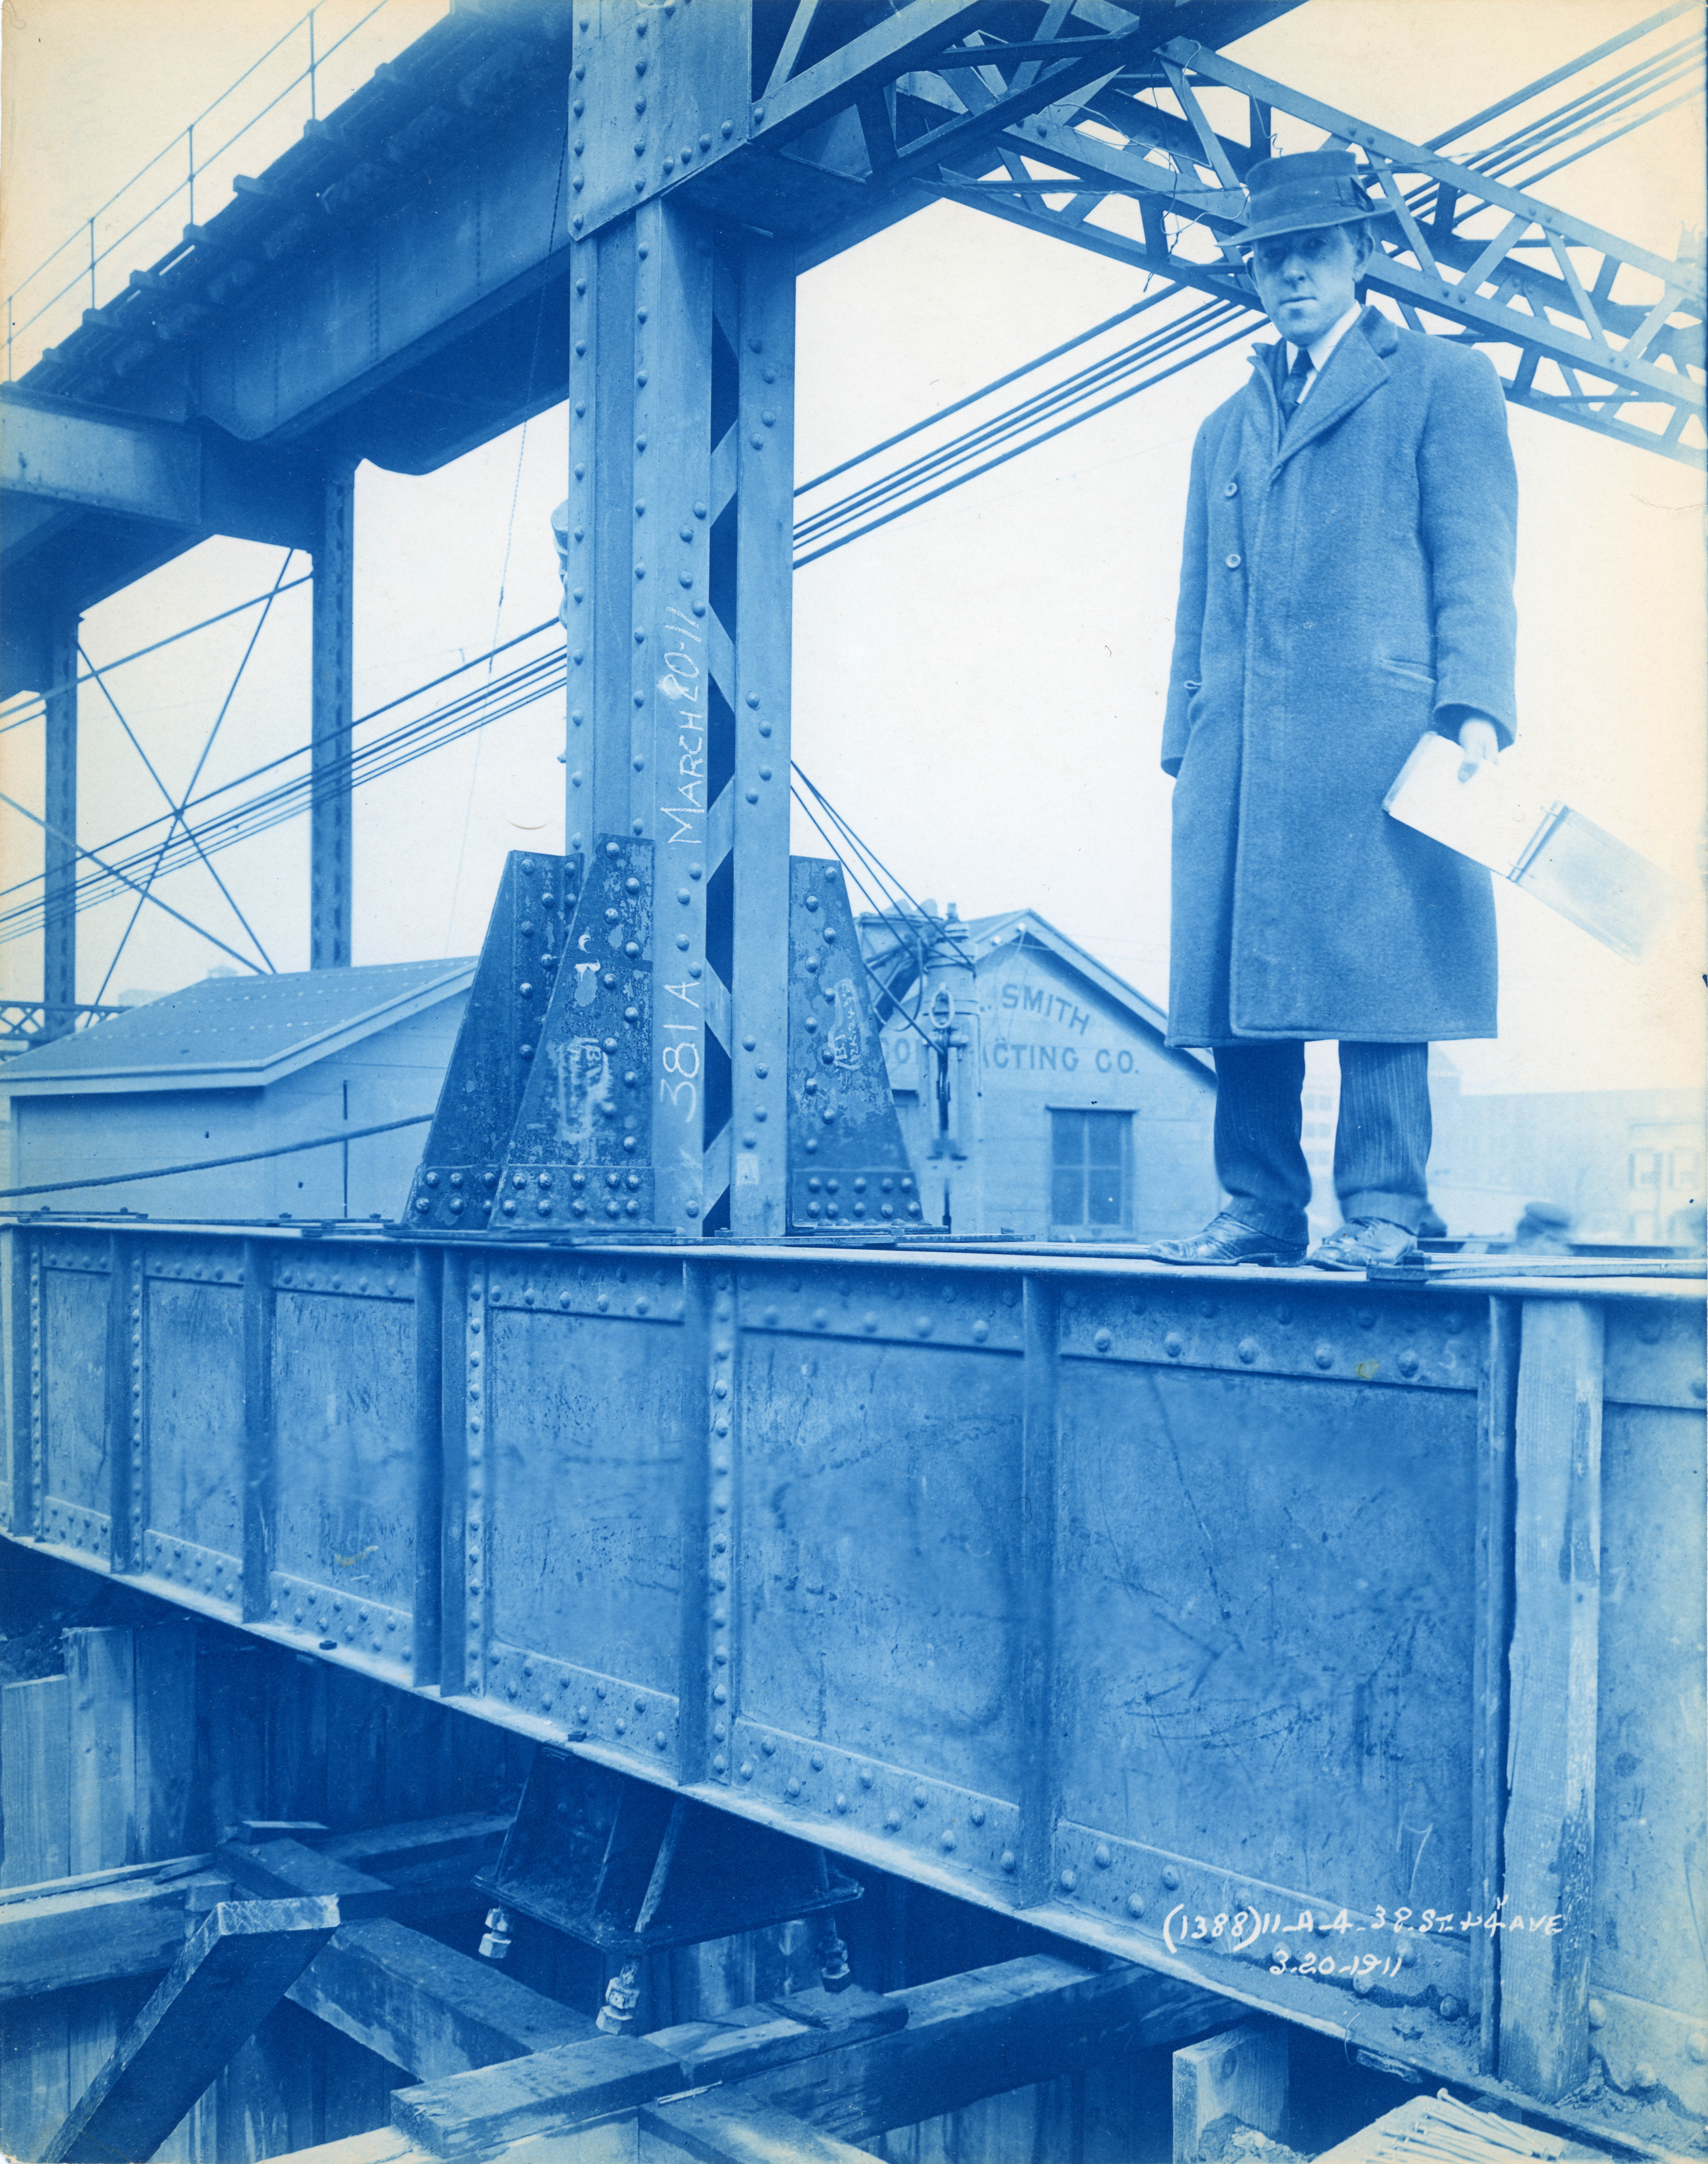 Man in suit stands on construction beam